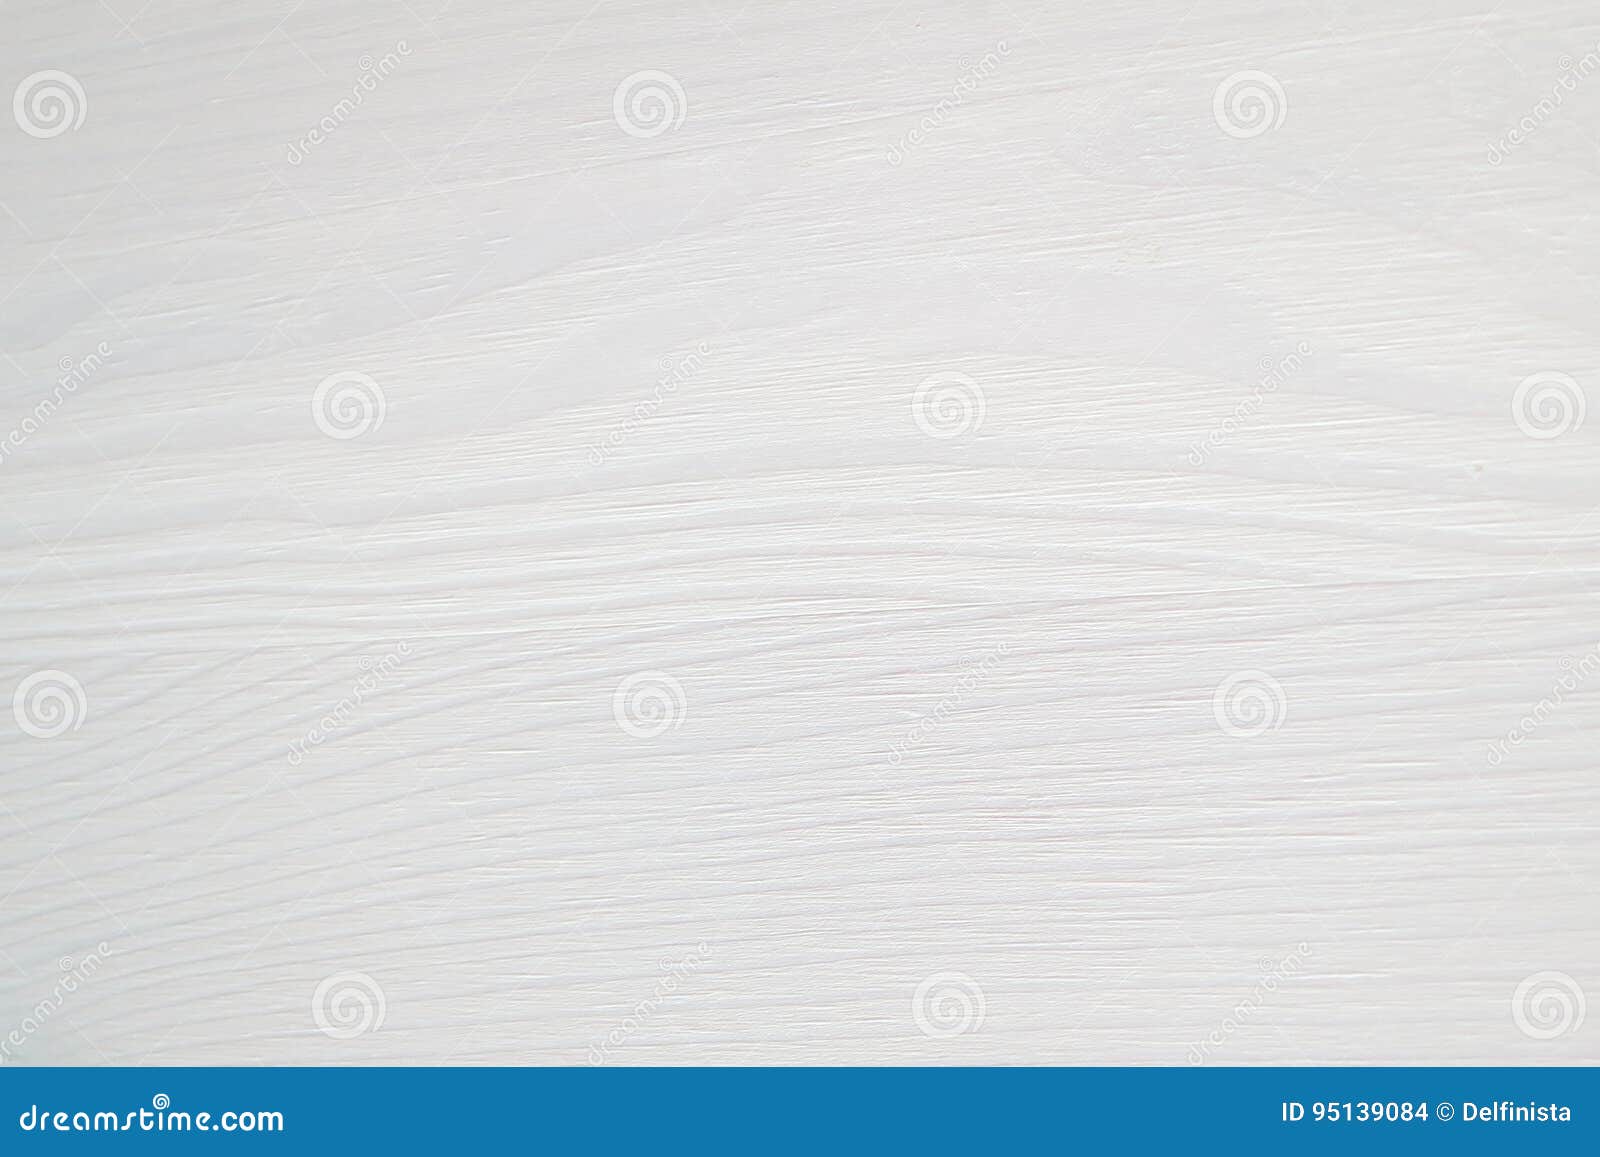  White  Wood Texture  Background Wooden Desk  Table Wall Or 